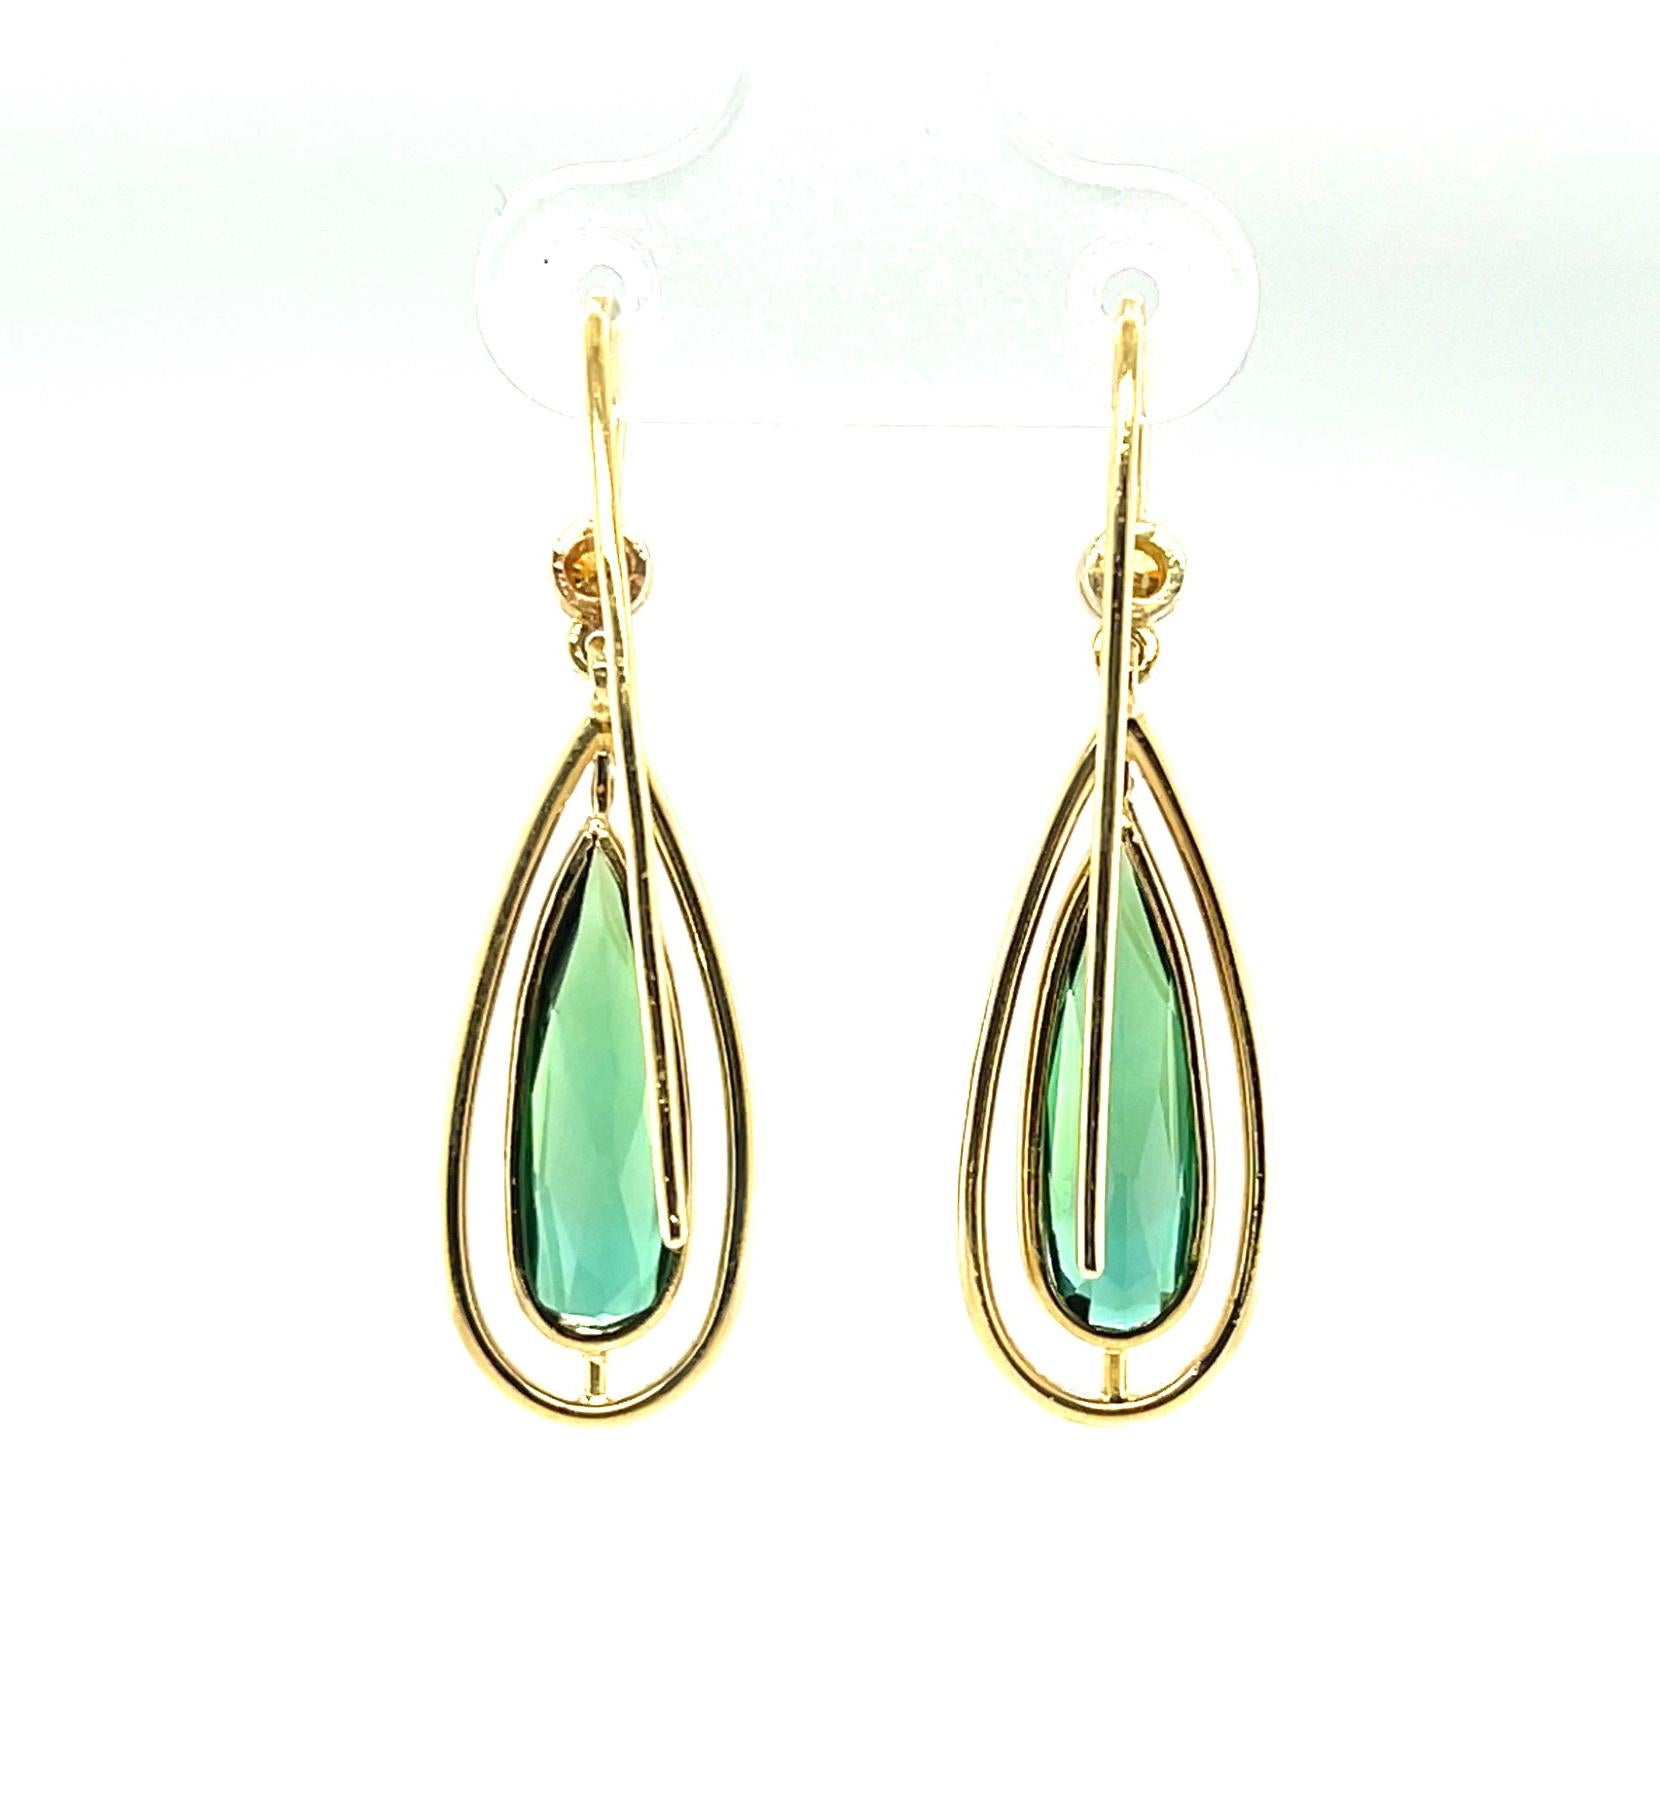  Green Tourmaline and Yellow Sapphire Dangle Earrings with Yellow Gold Halos For Sale 1